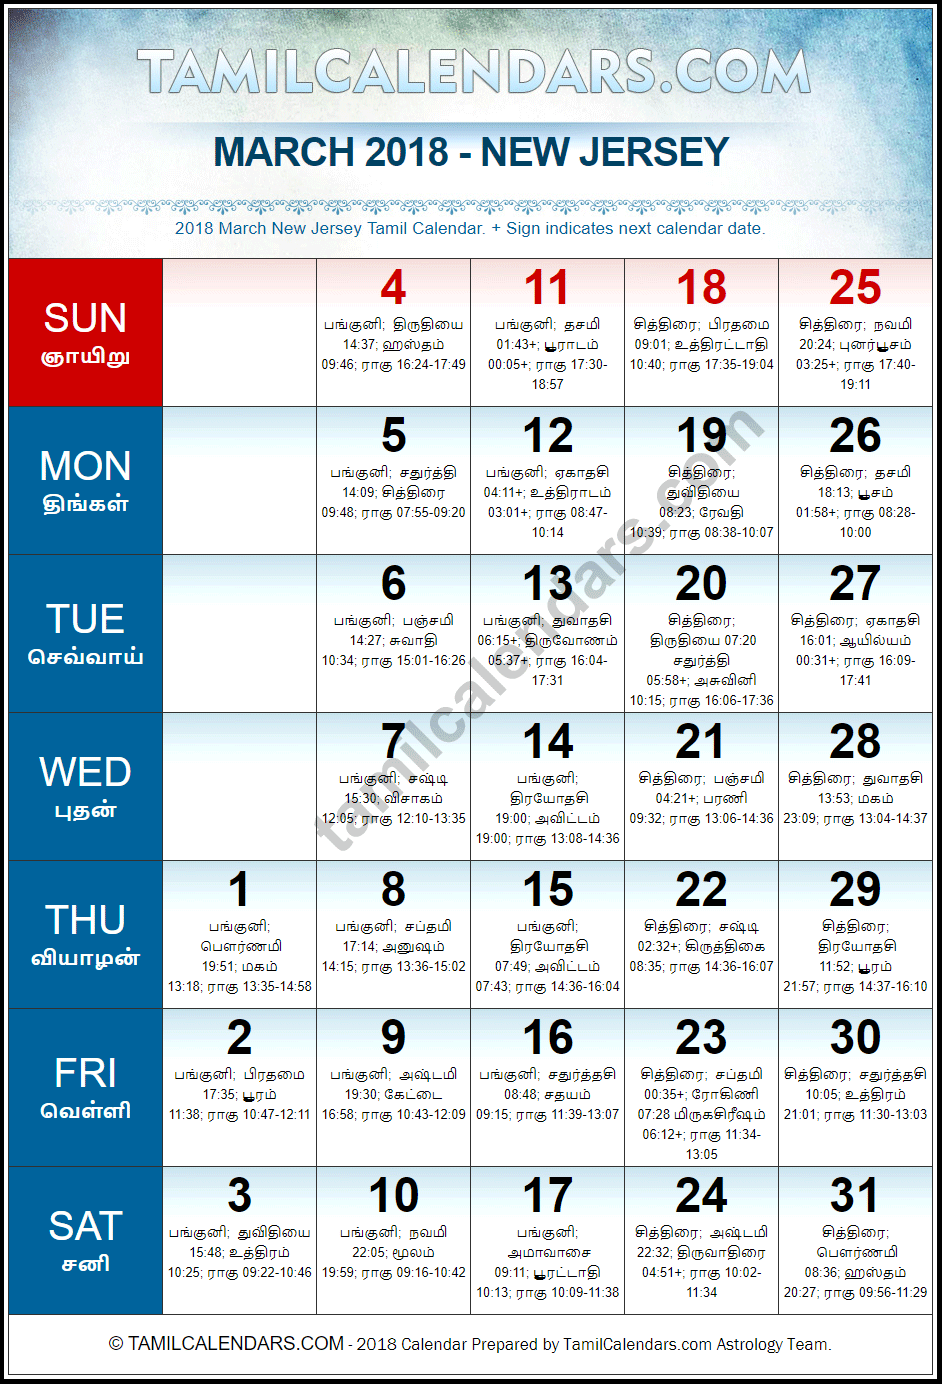 March 2018 Tamil Calendar for New Jersey, USA